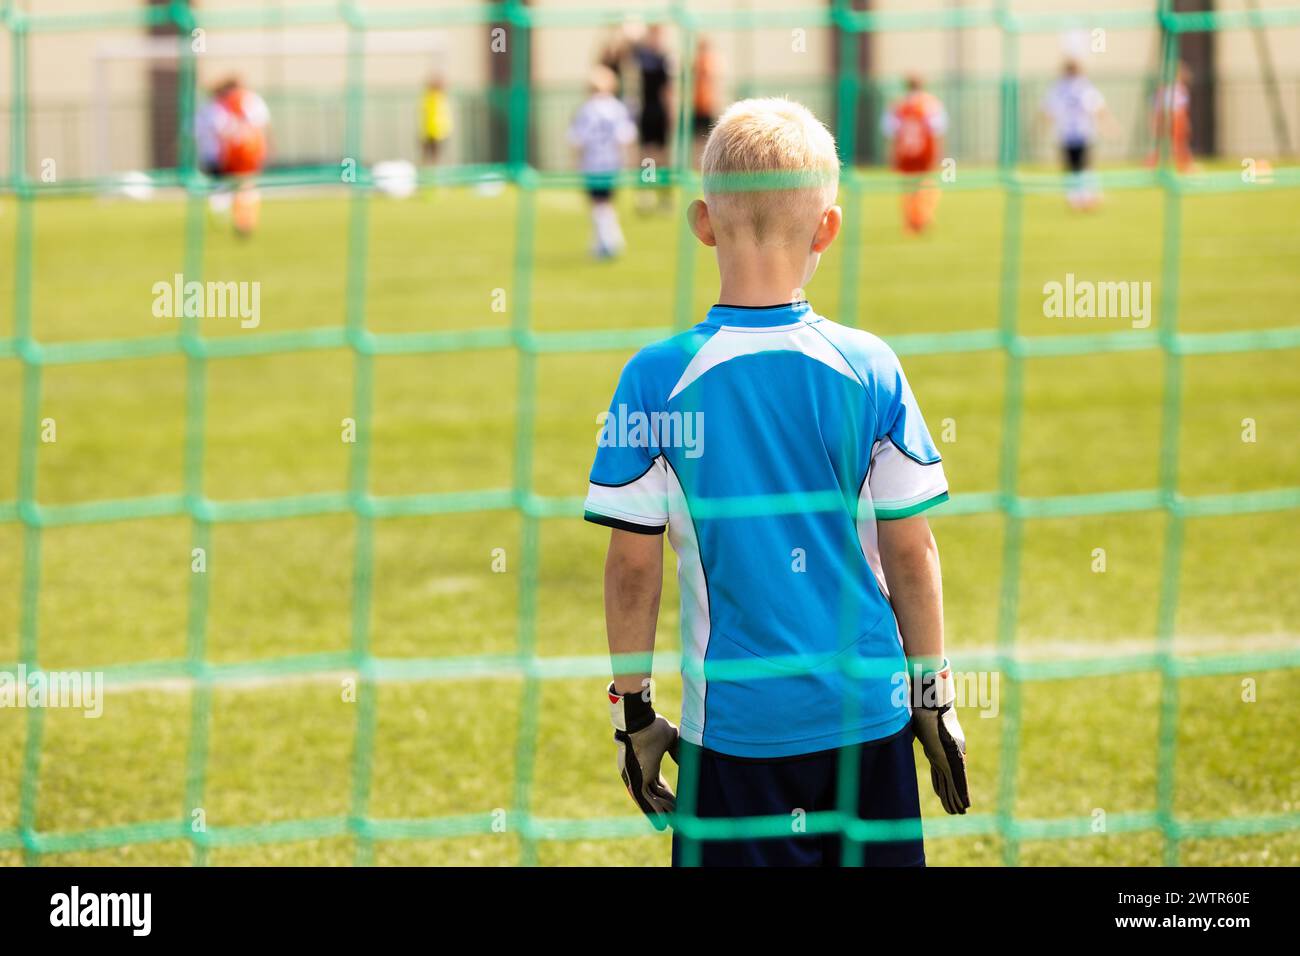 Little Boy in Goalkeeper Uniform and Gloves Standing in a Soccer Goal. Kids Play Football Game on School Sports Pitch Stock Photo